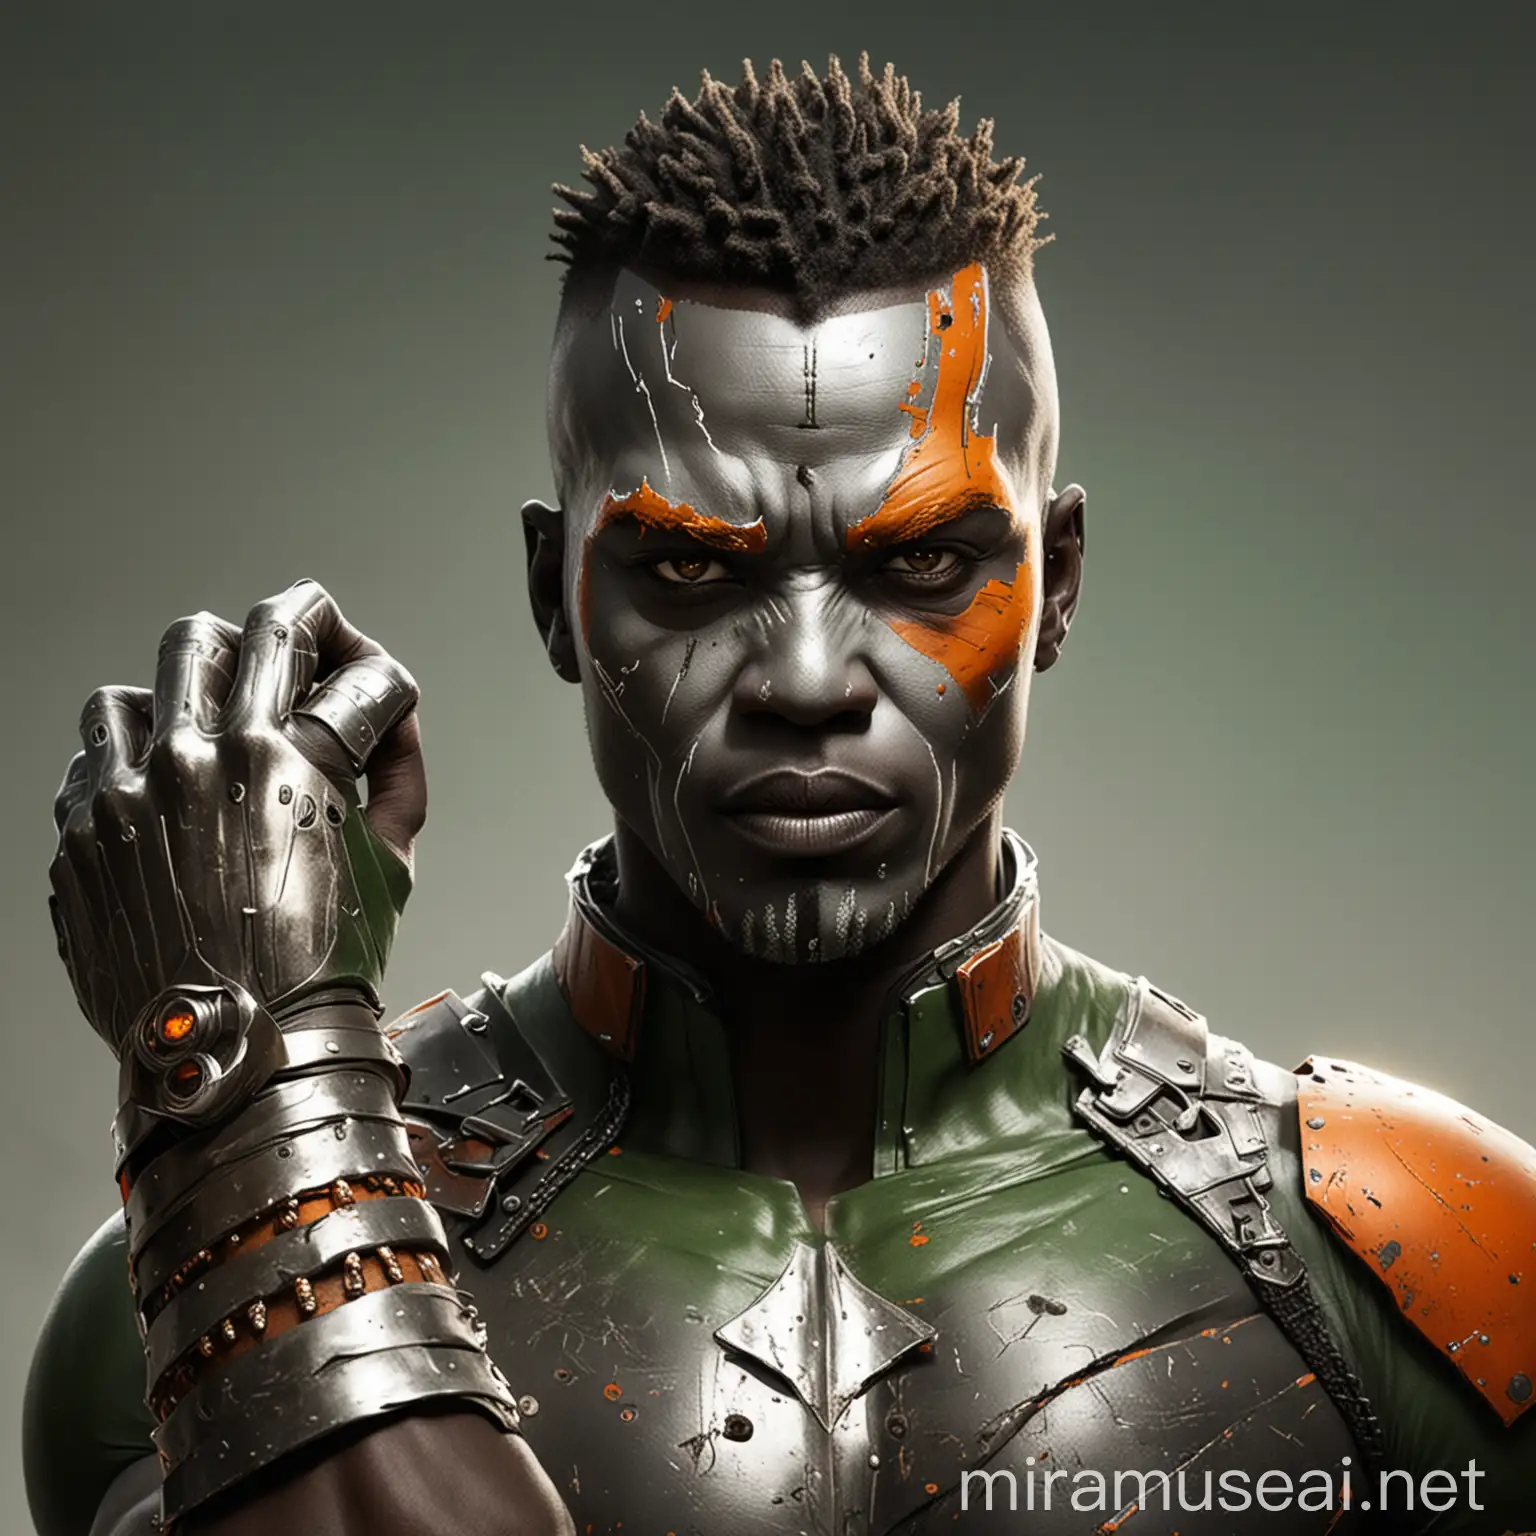 imagine An African superhero dread haircut with a silver mask predominantly black and hints of orange, white and green, the clenched right fist and a protective shield of bright orange, white, green worn on the left arm.